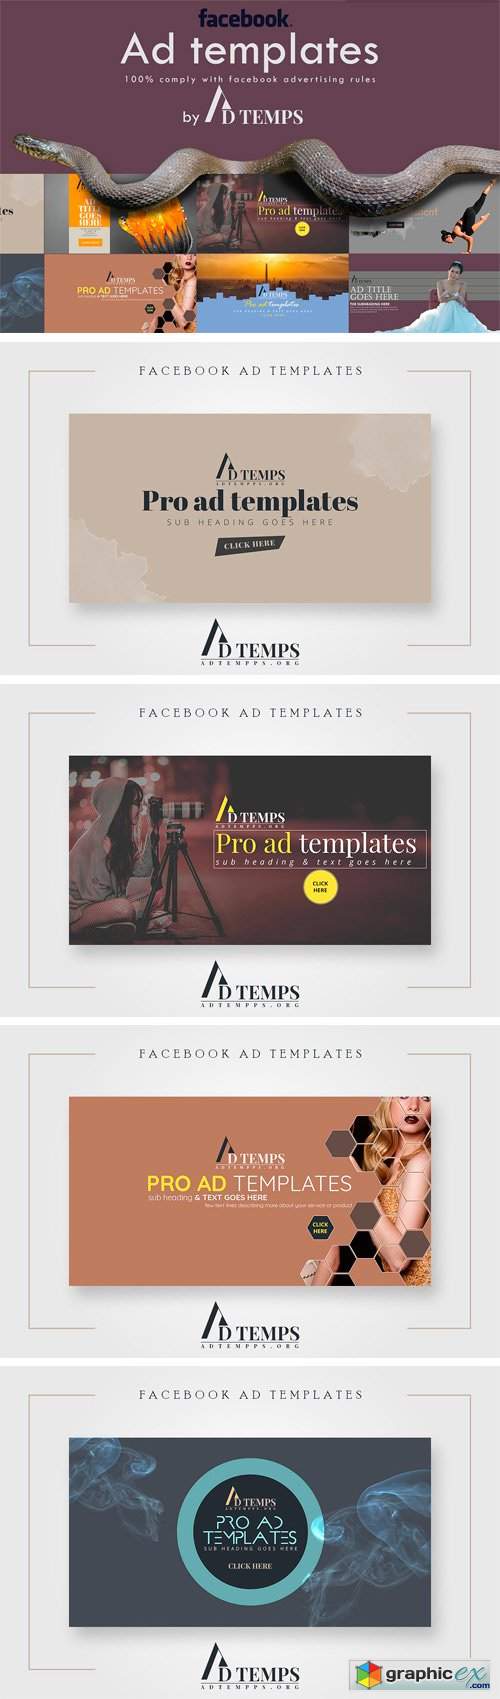 Facebook Ad Template Pack 01